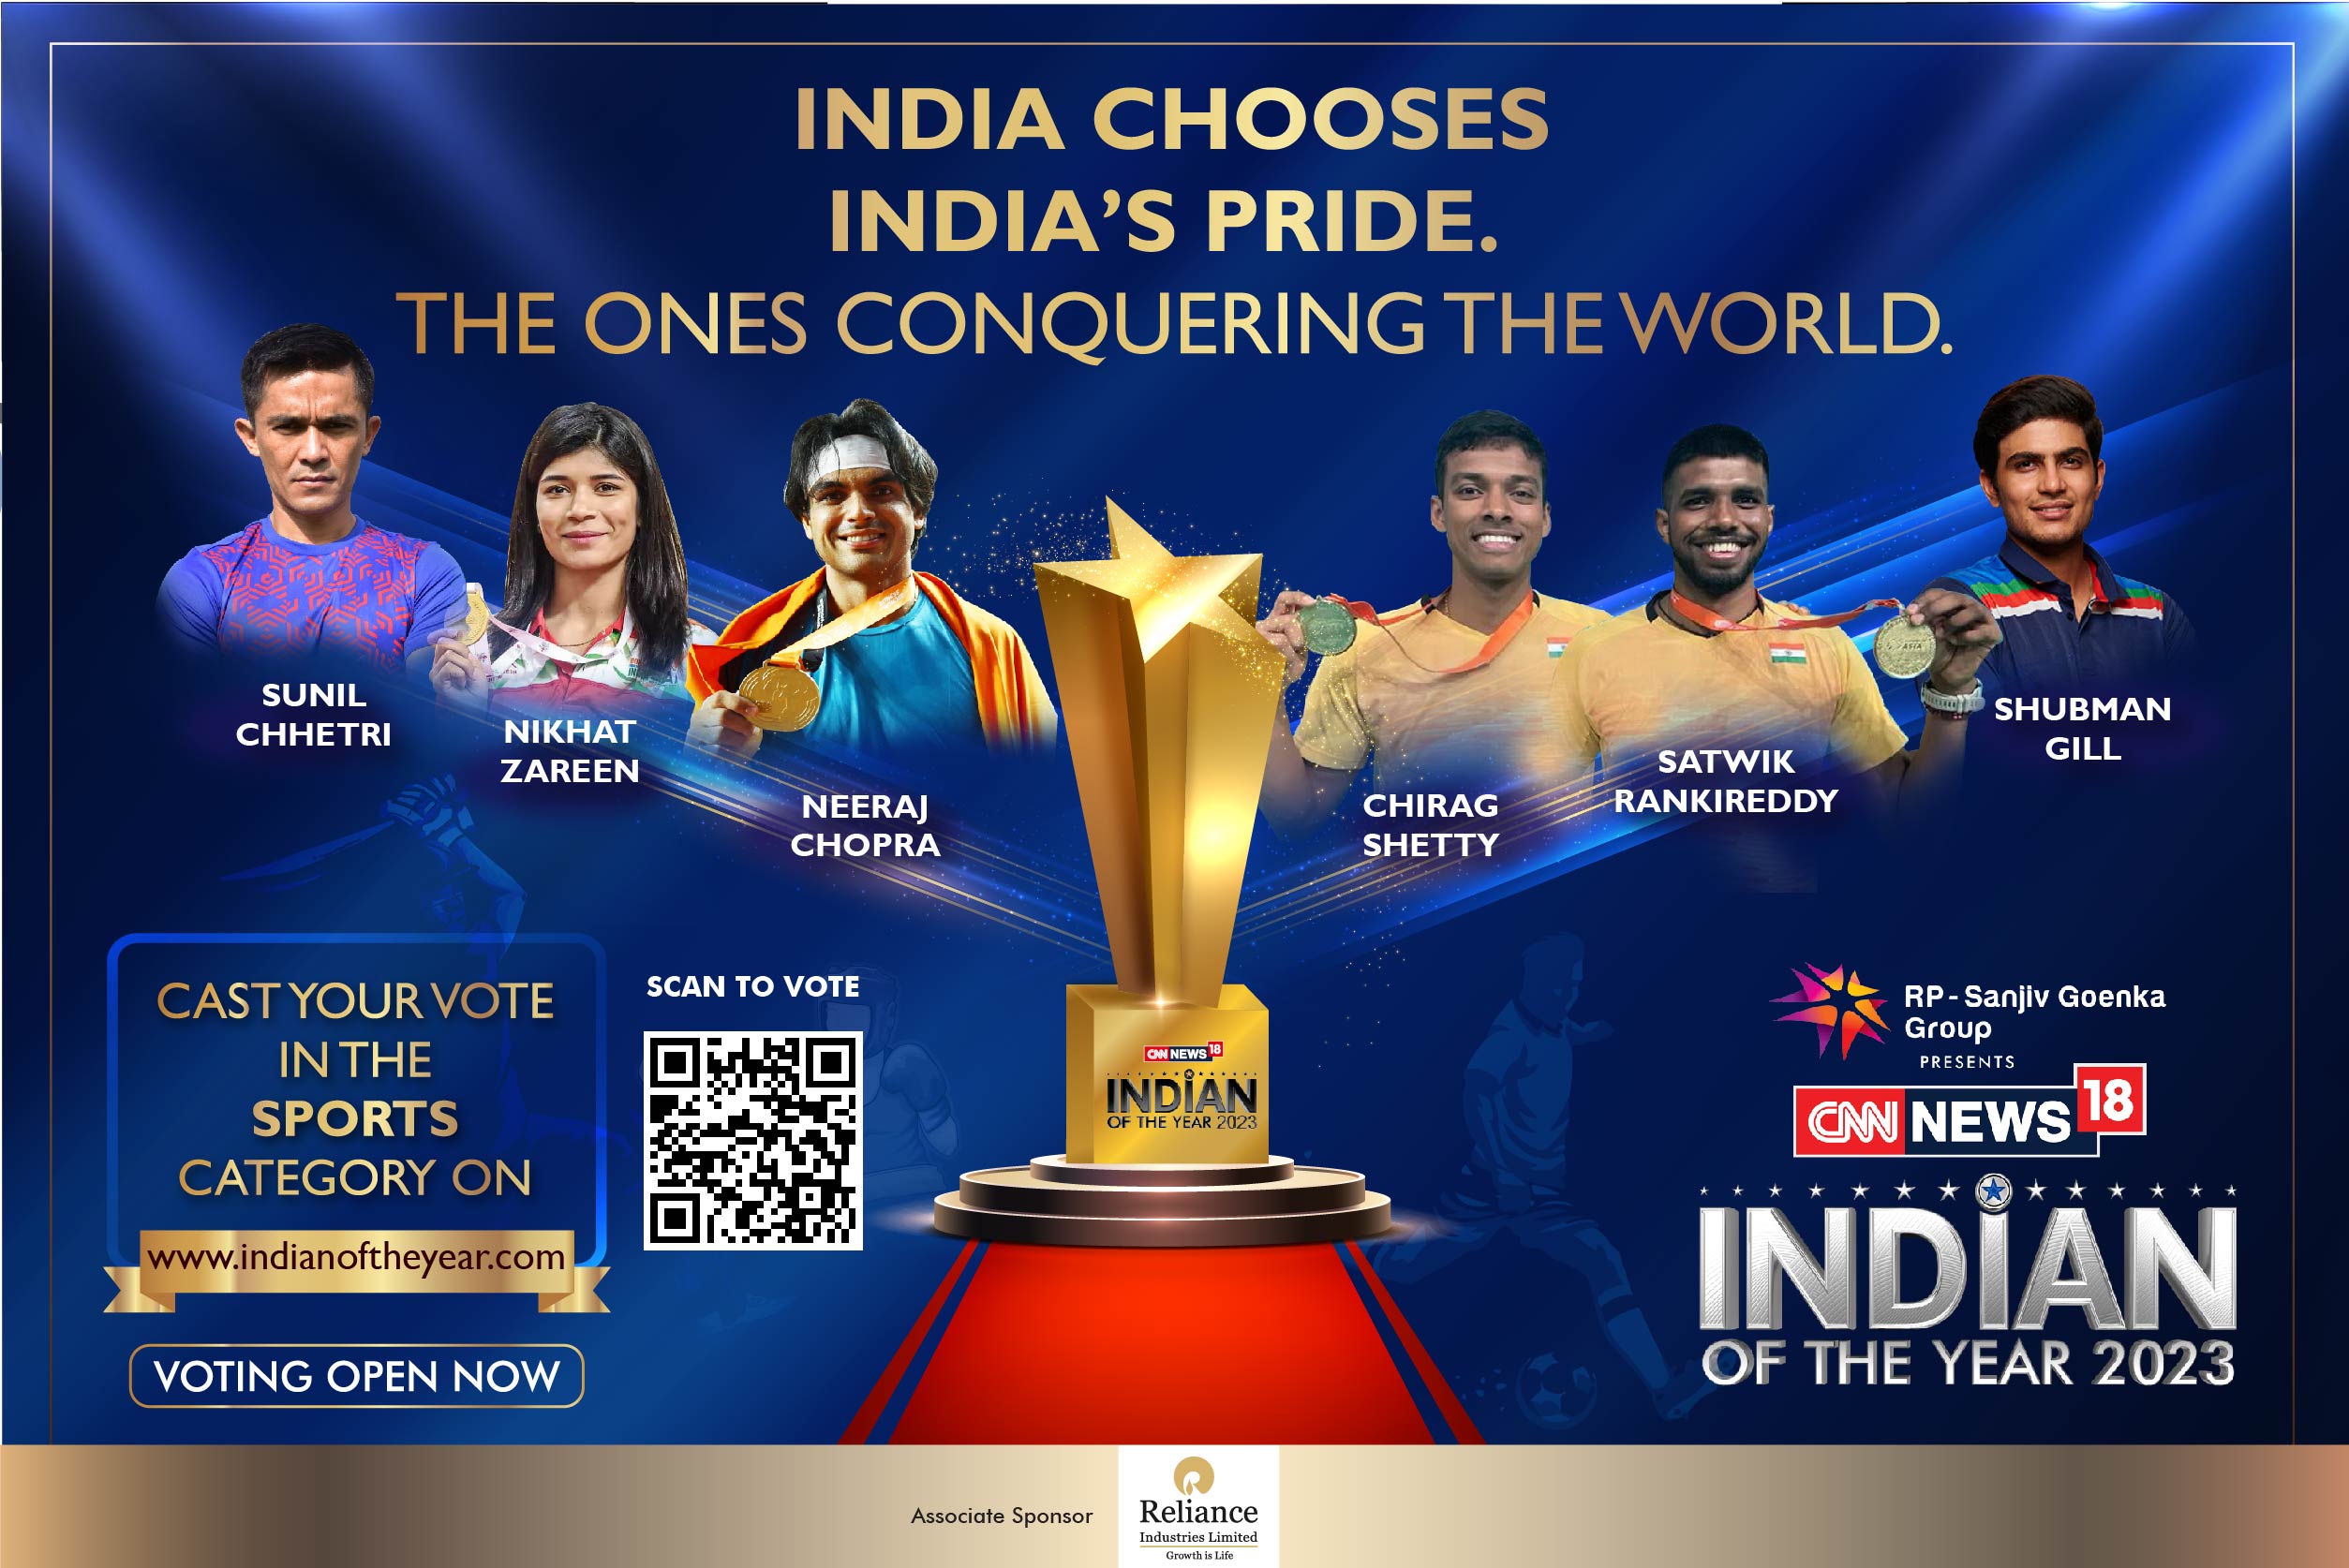 Vote for your favourite Sportsperson at ‘CNN-News18 Indian of the Year 2023’